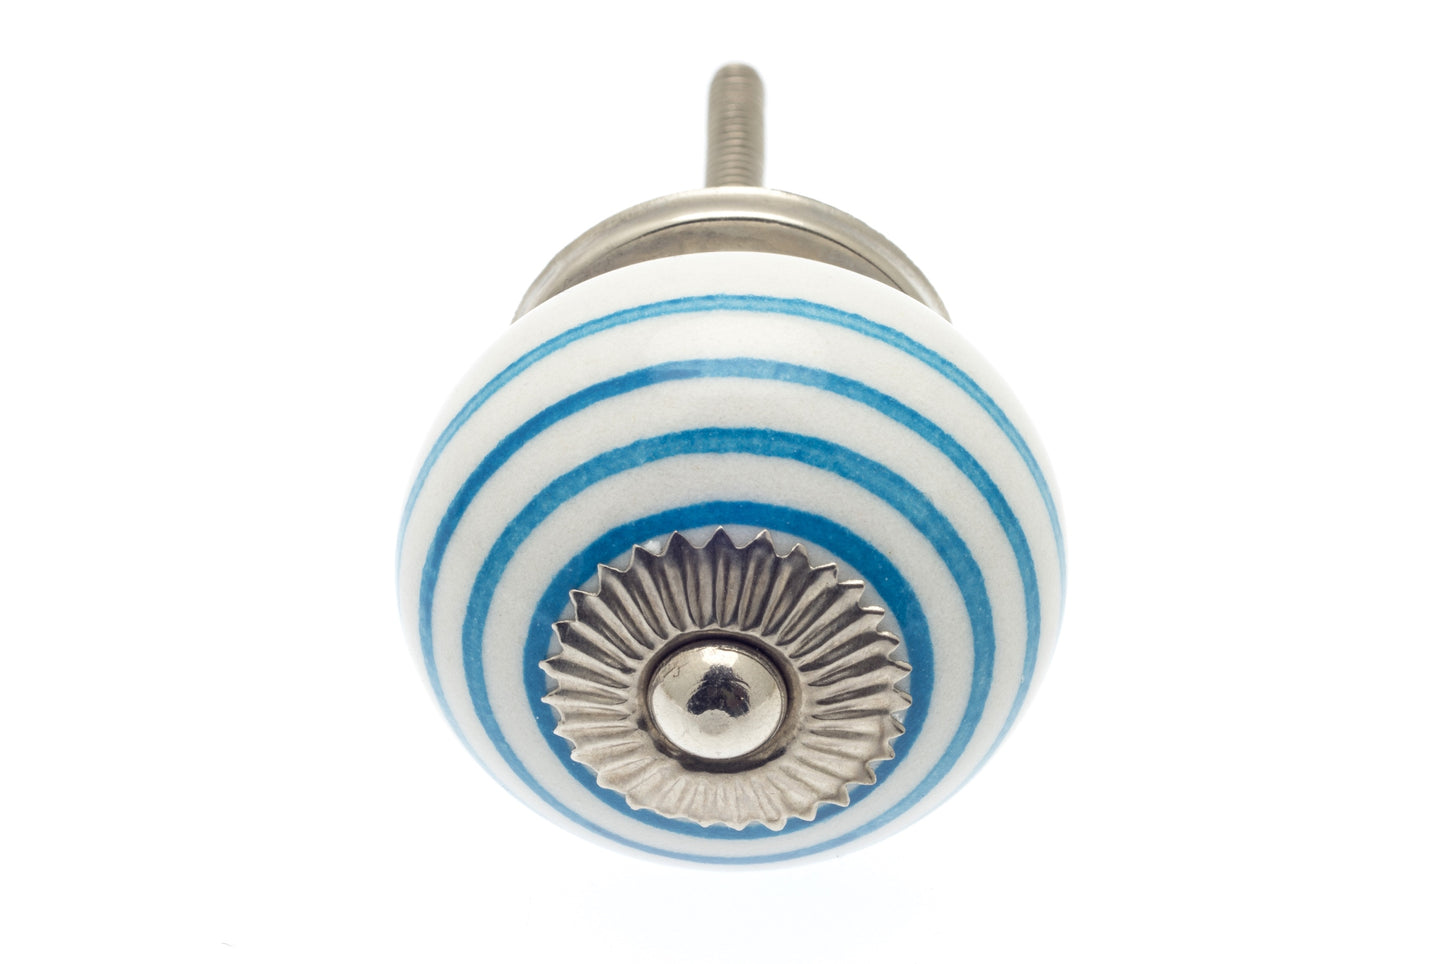 Round Ceramic Knob White with Blue Stripes / Hoops 40mm